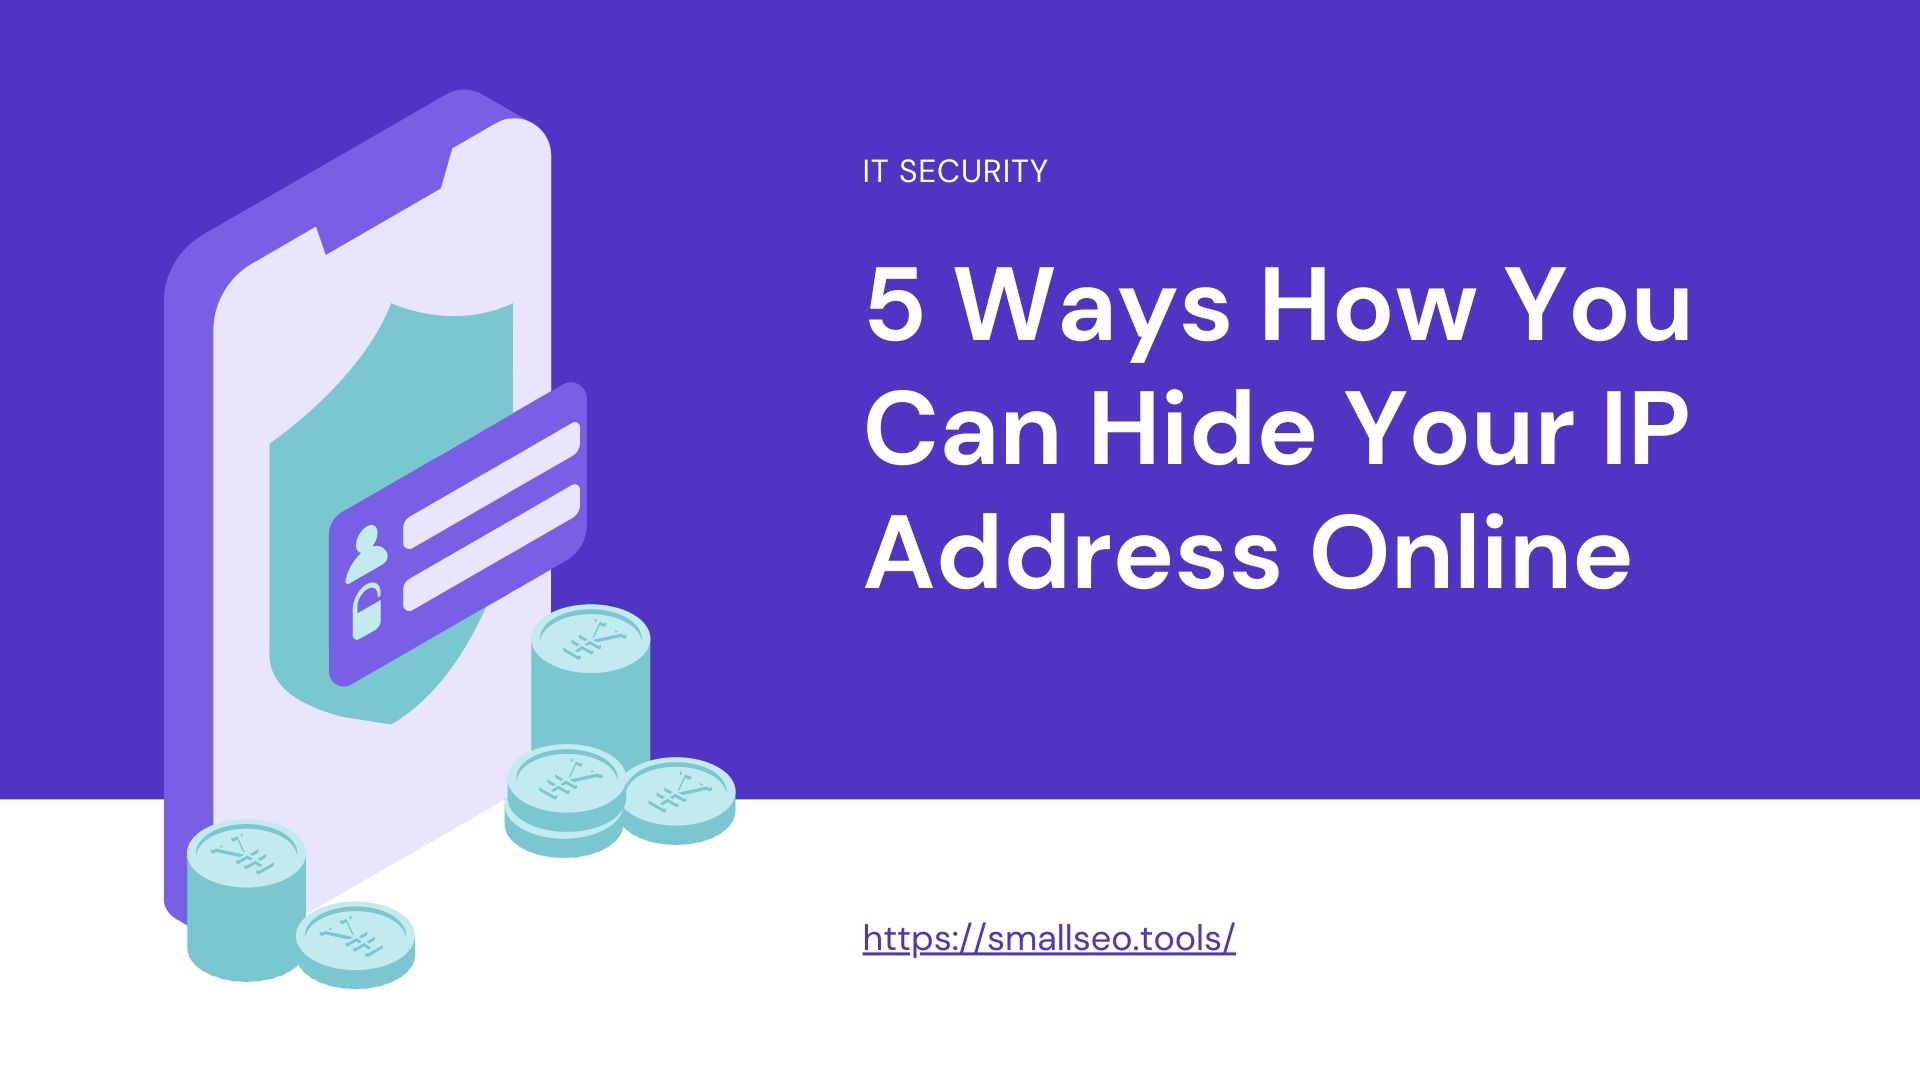 Five ways how you can hide your IP address online